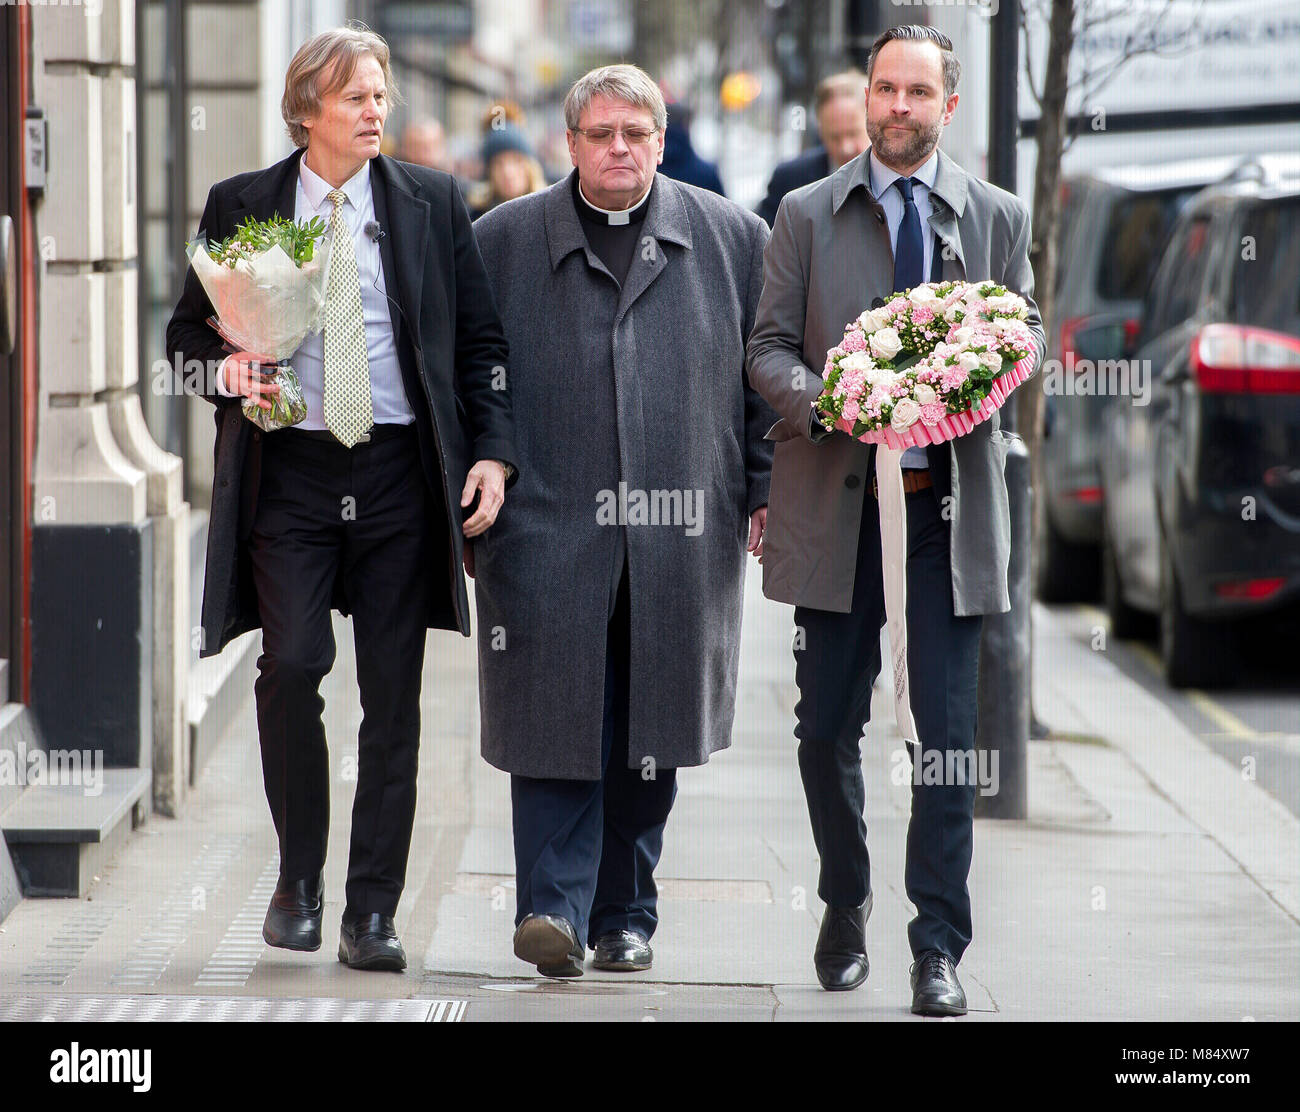 (left to right) Father of Martine Vik Magnussen Odd Petter Magnussen, Norwegian Rector and Senior Chaplain Torbjorn Holt and Head of Martine Foundation Patrick Lundevall-Unger, arrive at Great Portland Street in London to lay flowers where the body of Mr Magnussen's daughter was found. Stock Photo